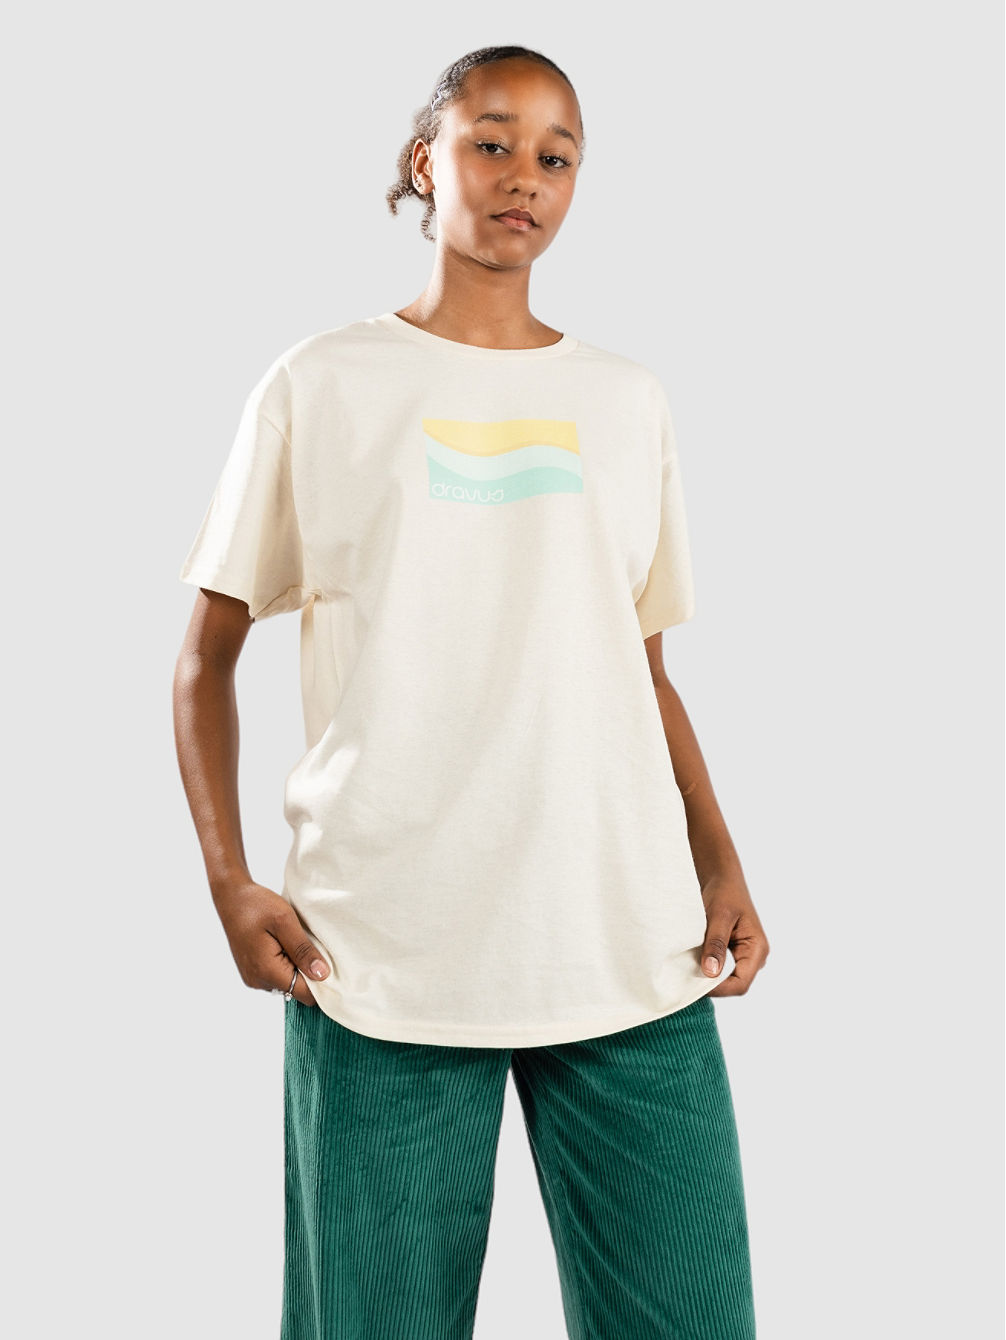 On The Shore T-Shirt